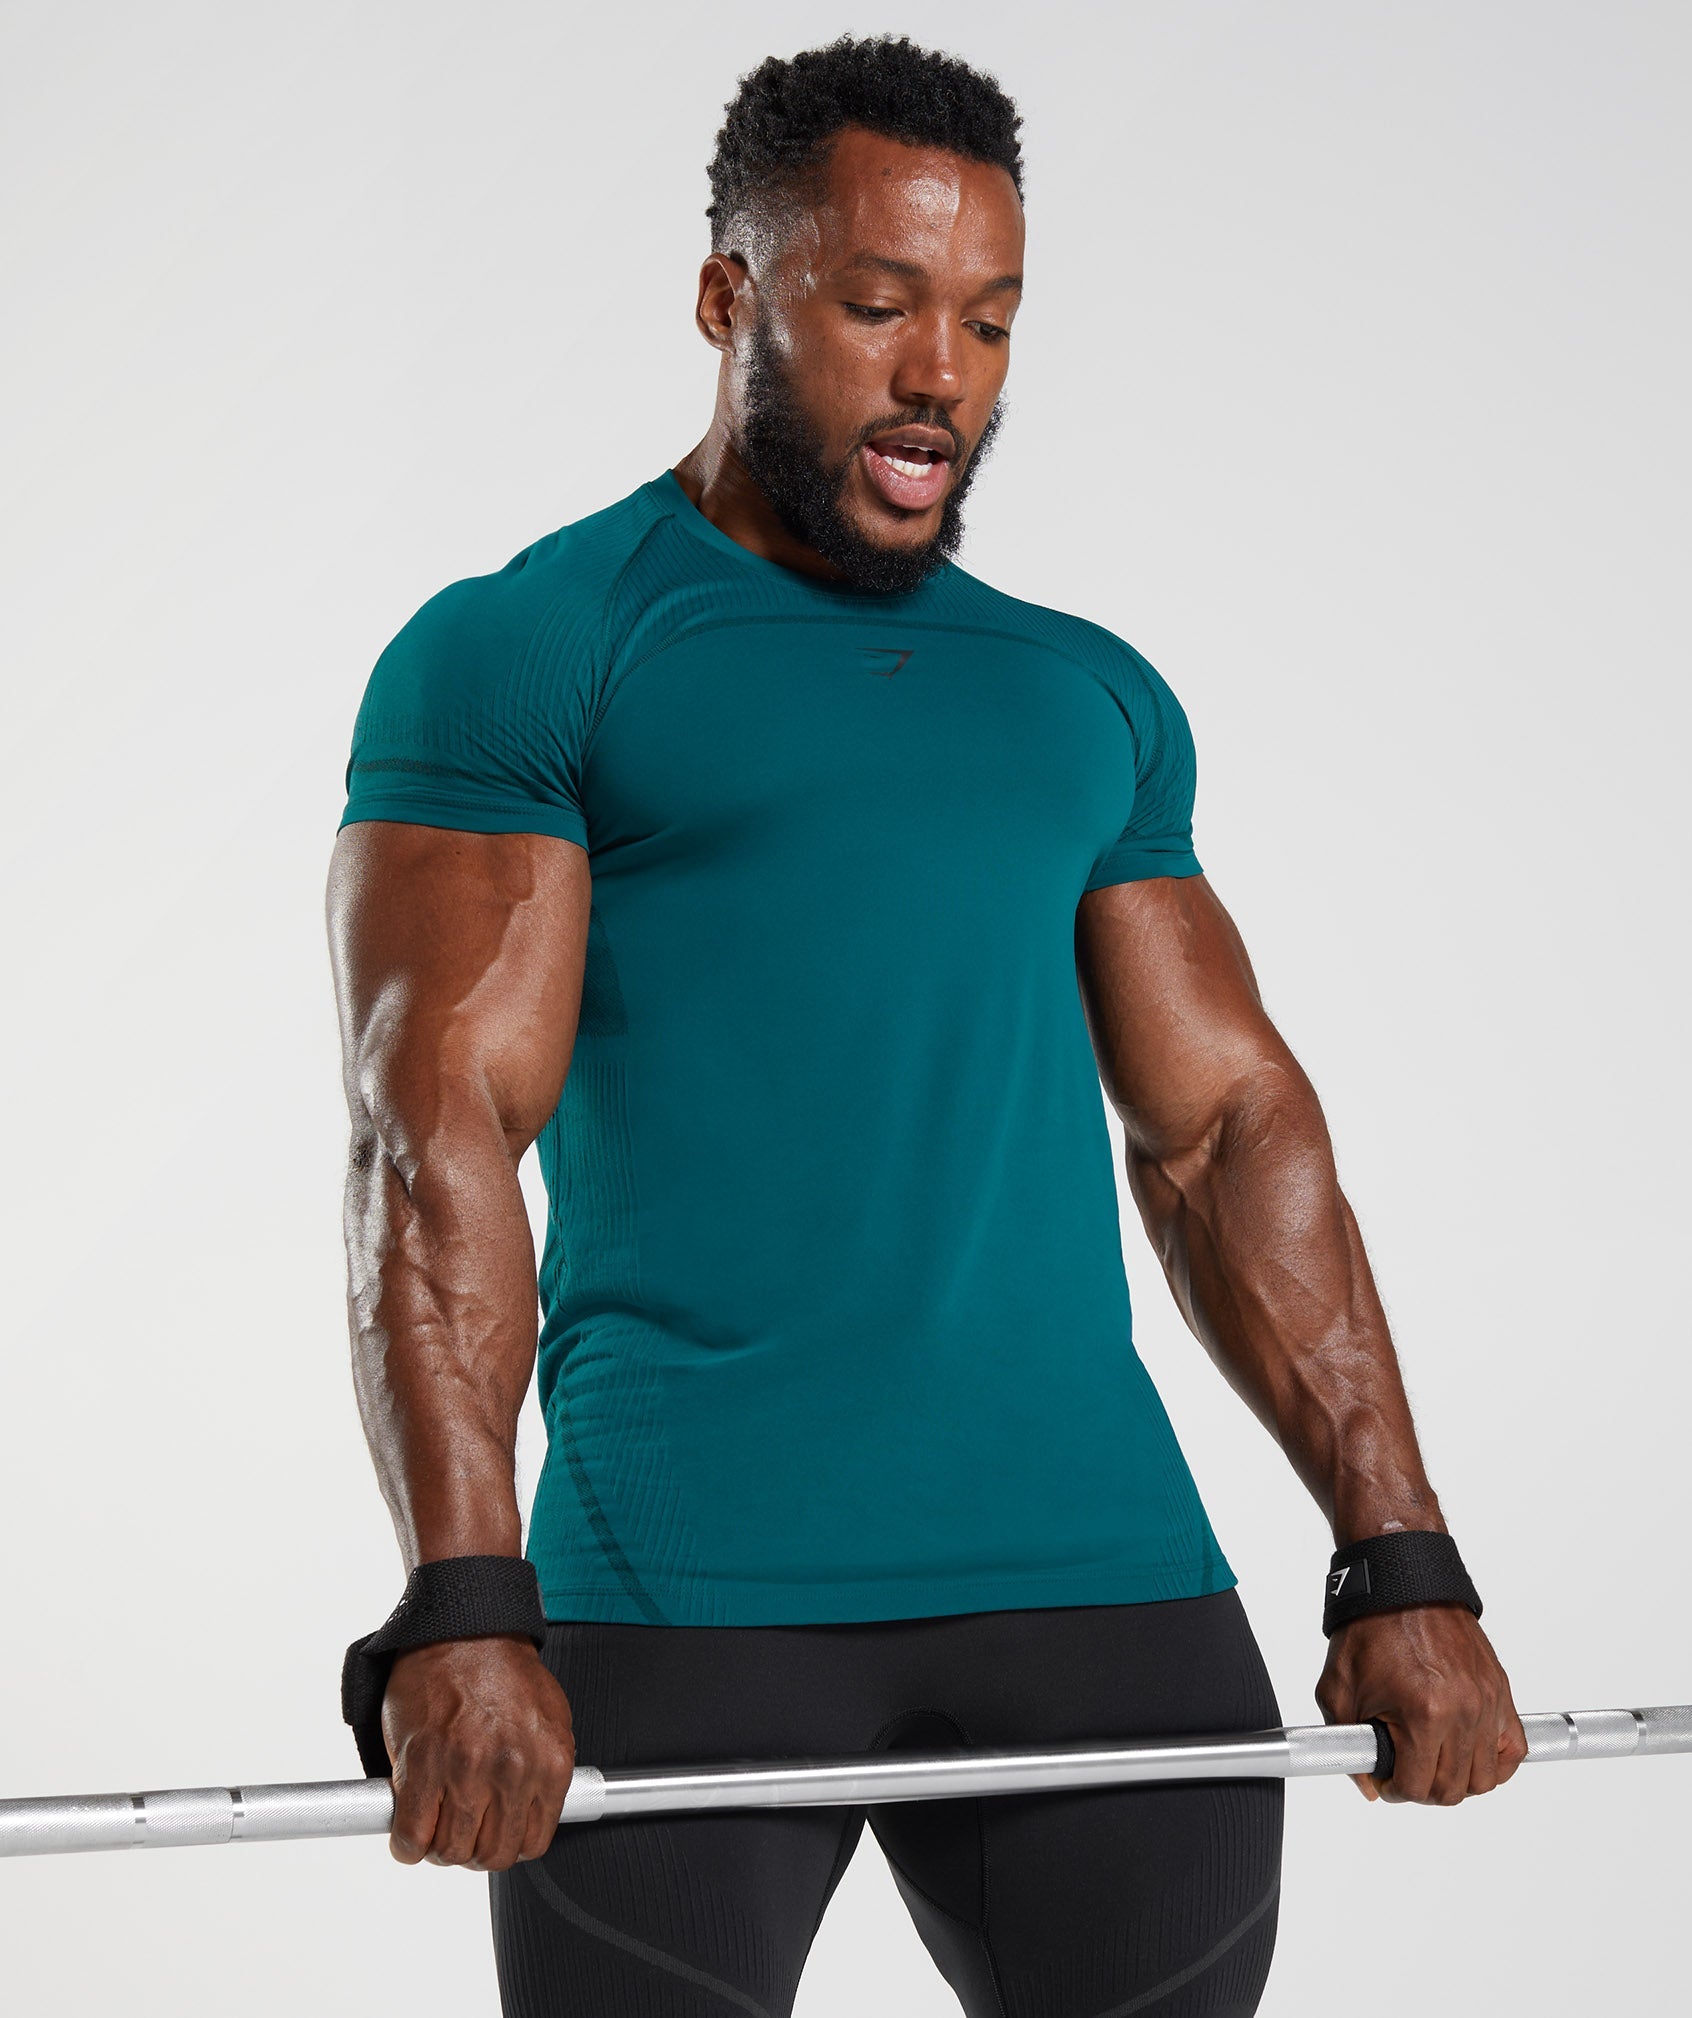 315 Seamless T-Shirt in Winter Teal/Black - view 3